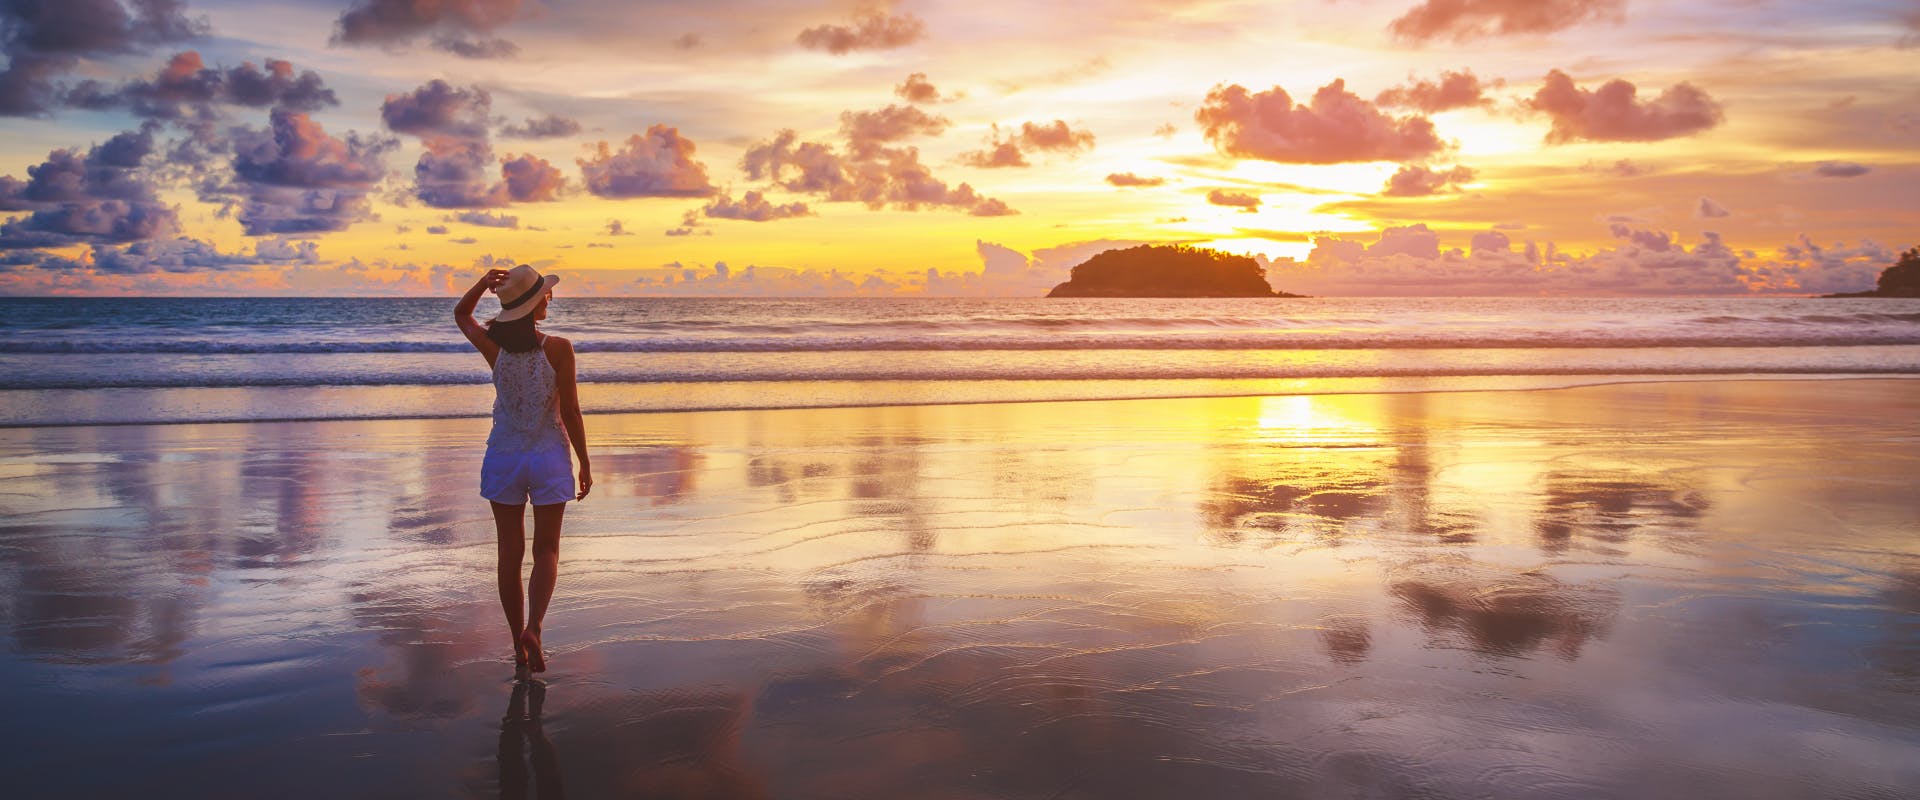 a solo female traveler walking along a beach at low tide with one hand on her sun hat watching the sun set